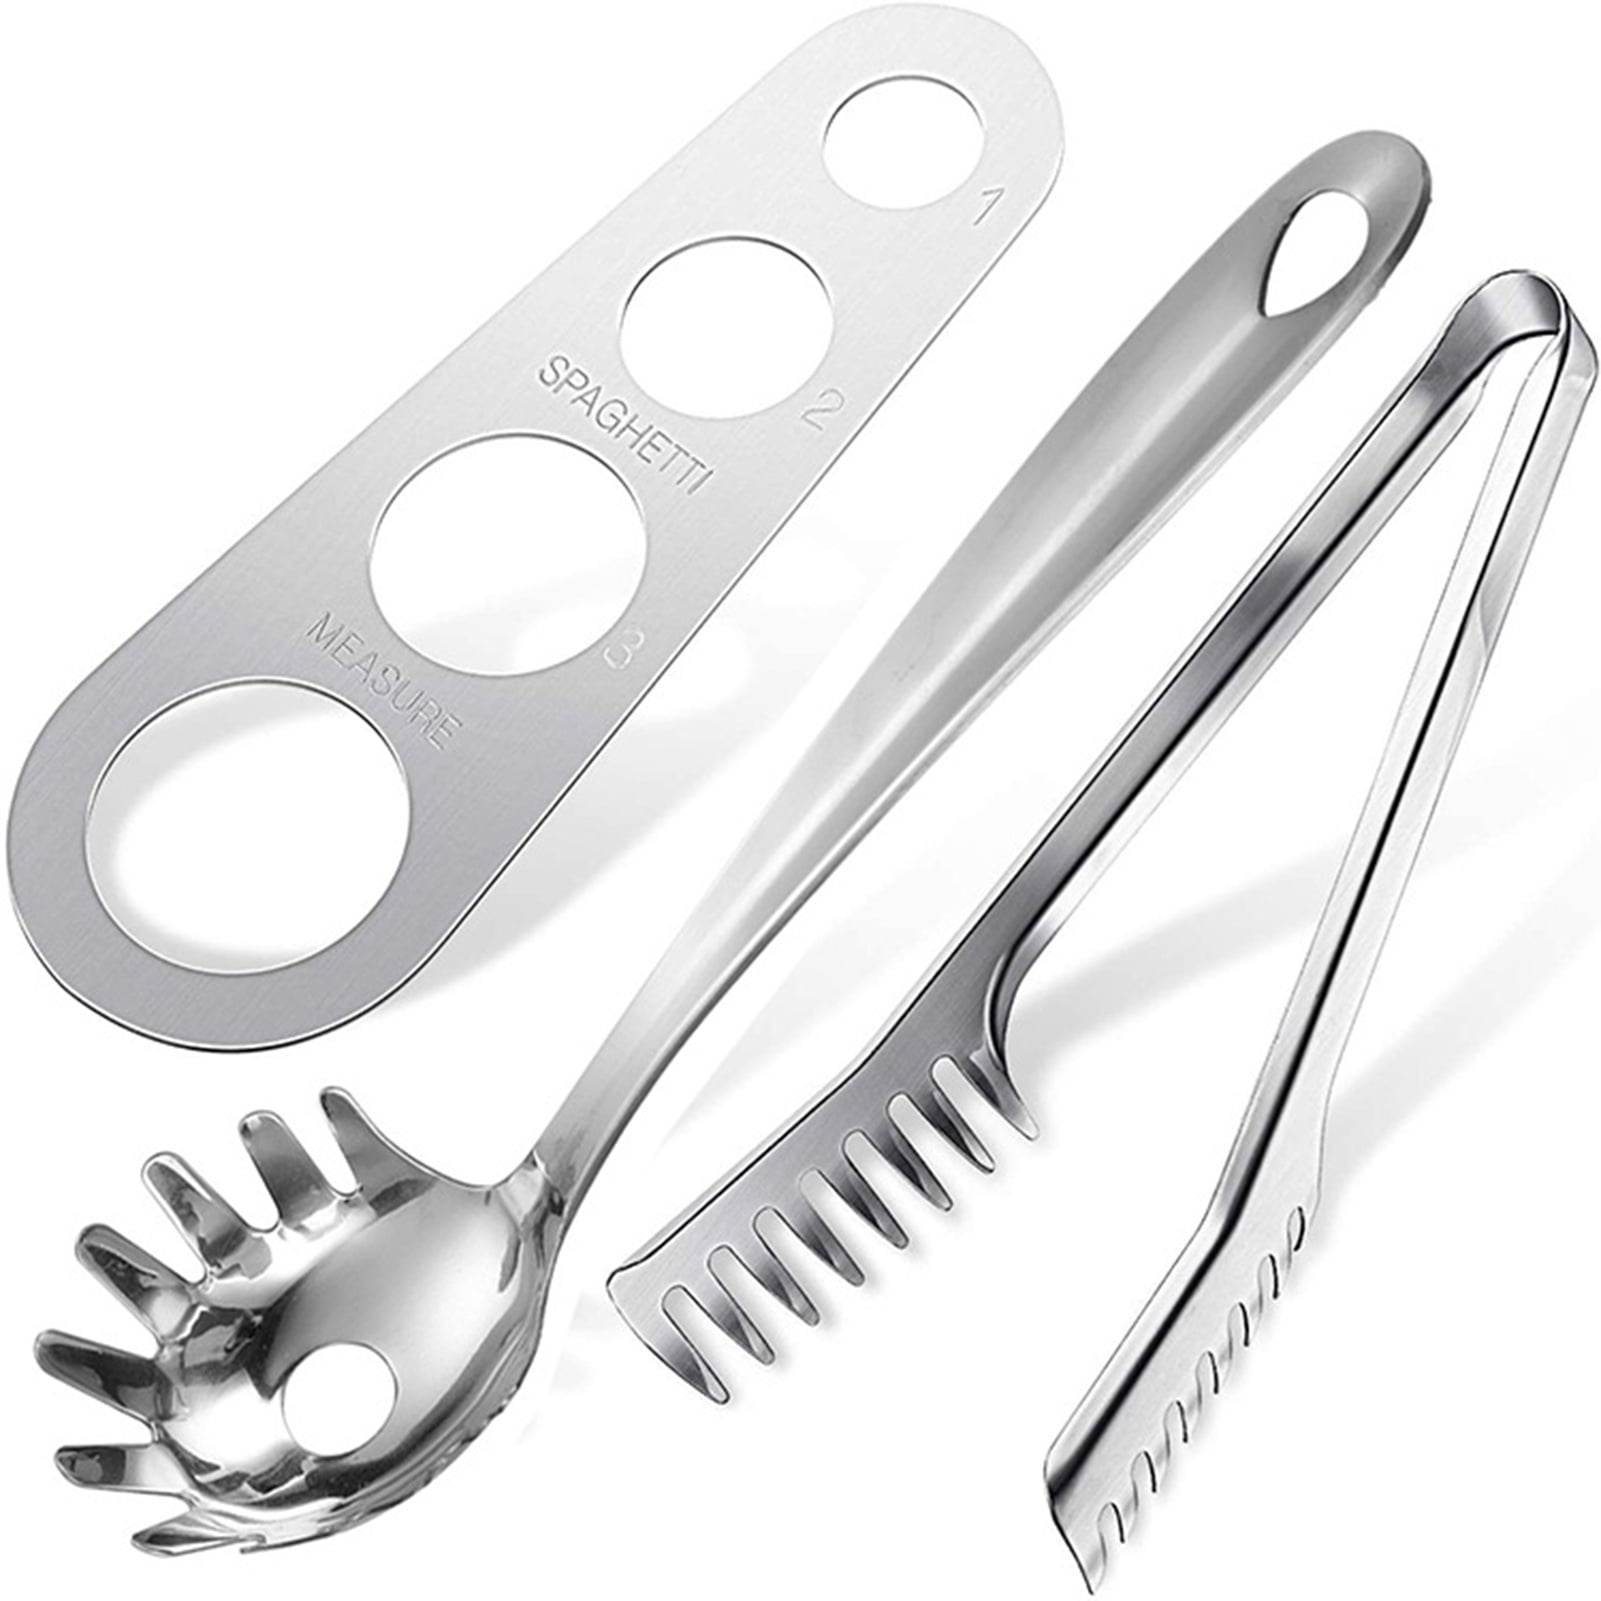 Can we talk about cooking tools? Whats your favorite metal spatula, tongs,  fork, spoon, knife, you use on or with your CI? Despite mixed reviews I  love my MÄNNKITCHEN spatula. Cheap but